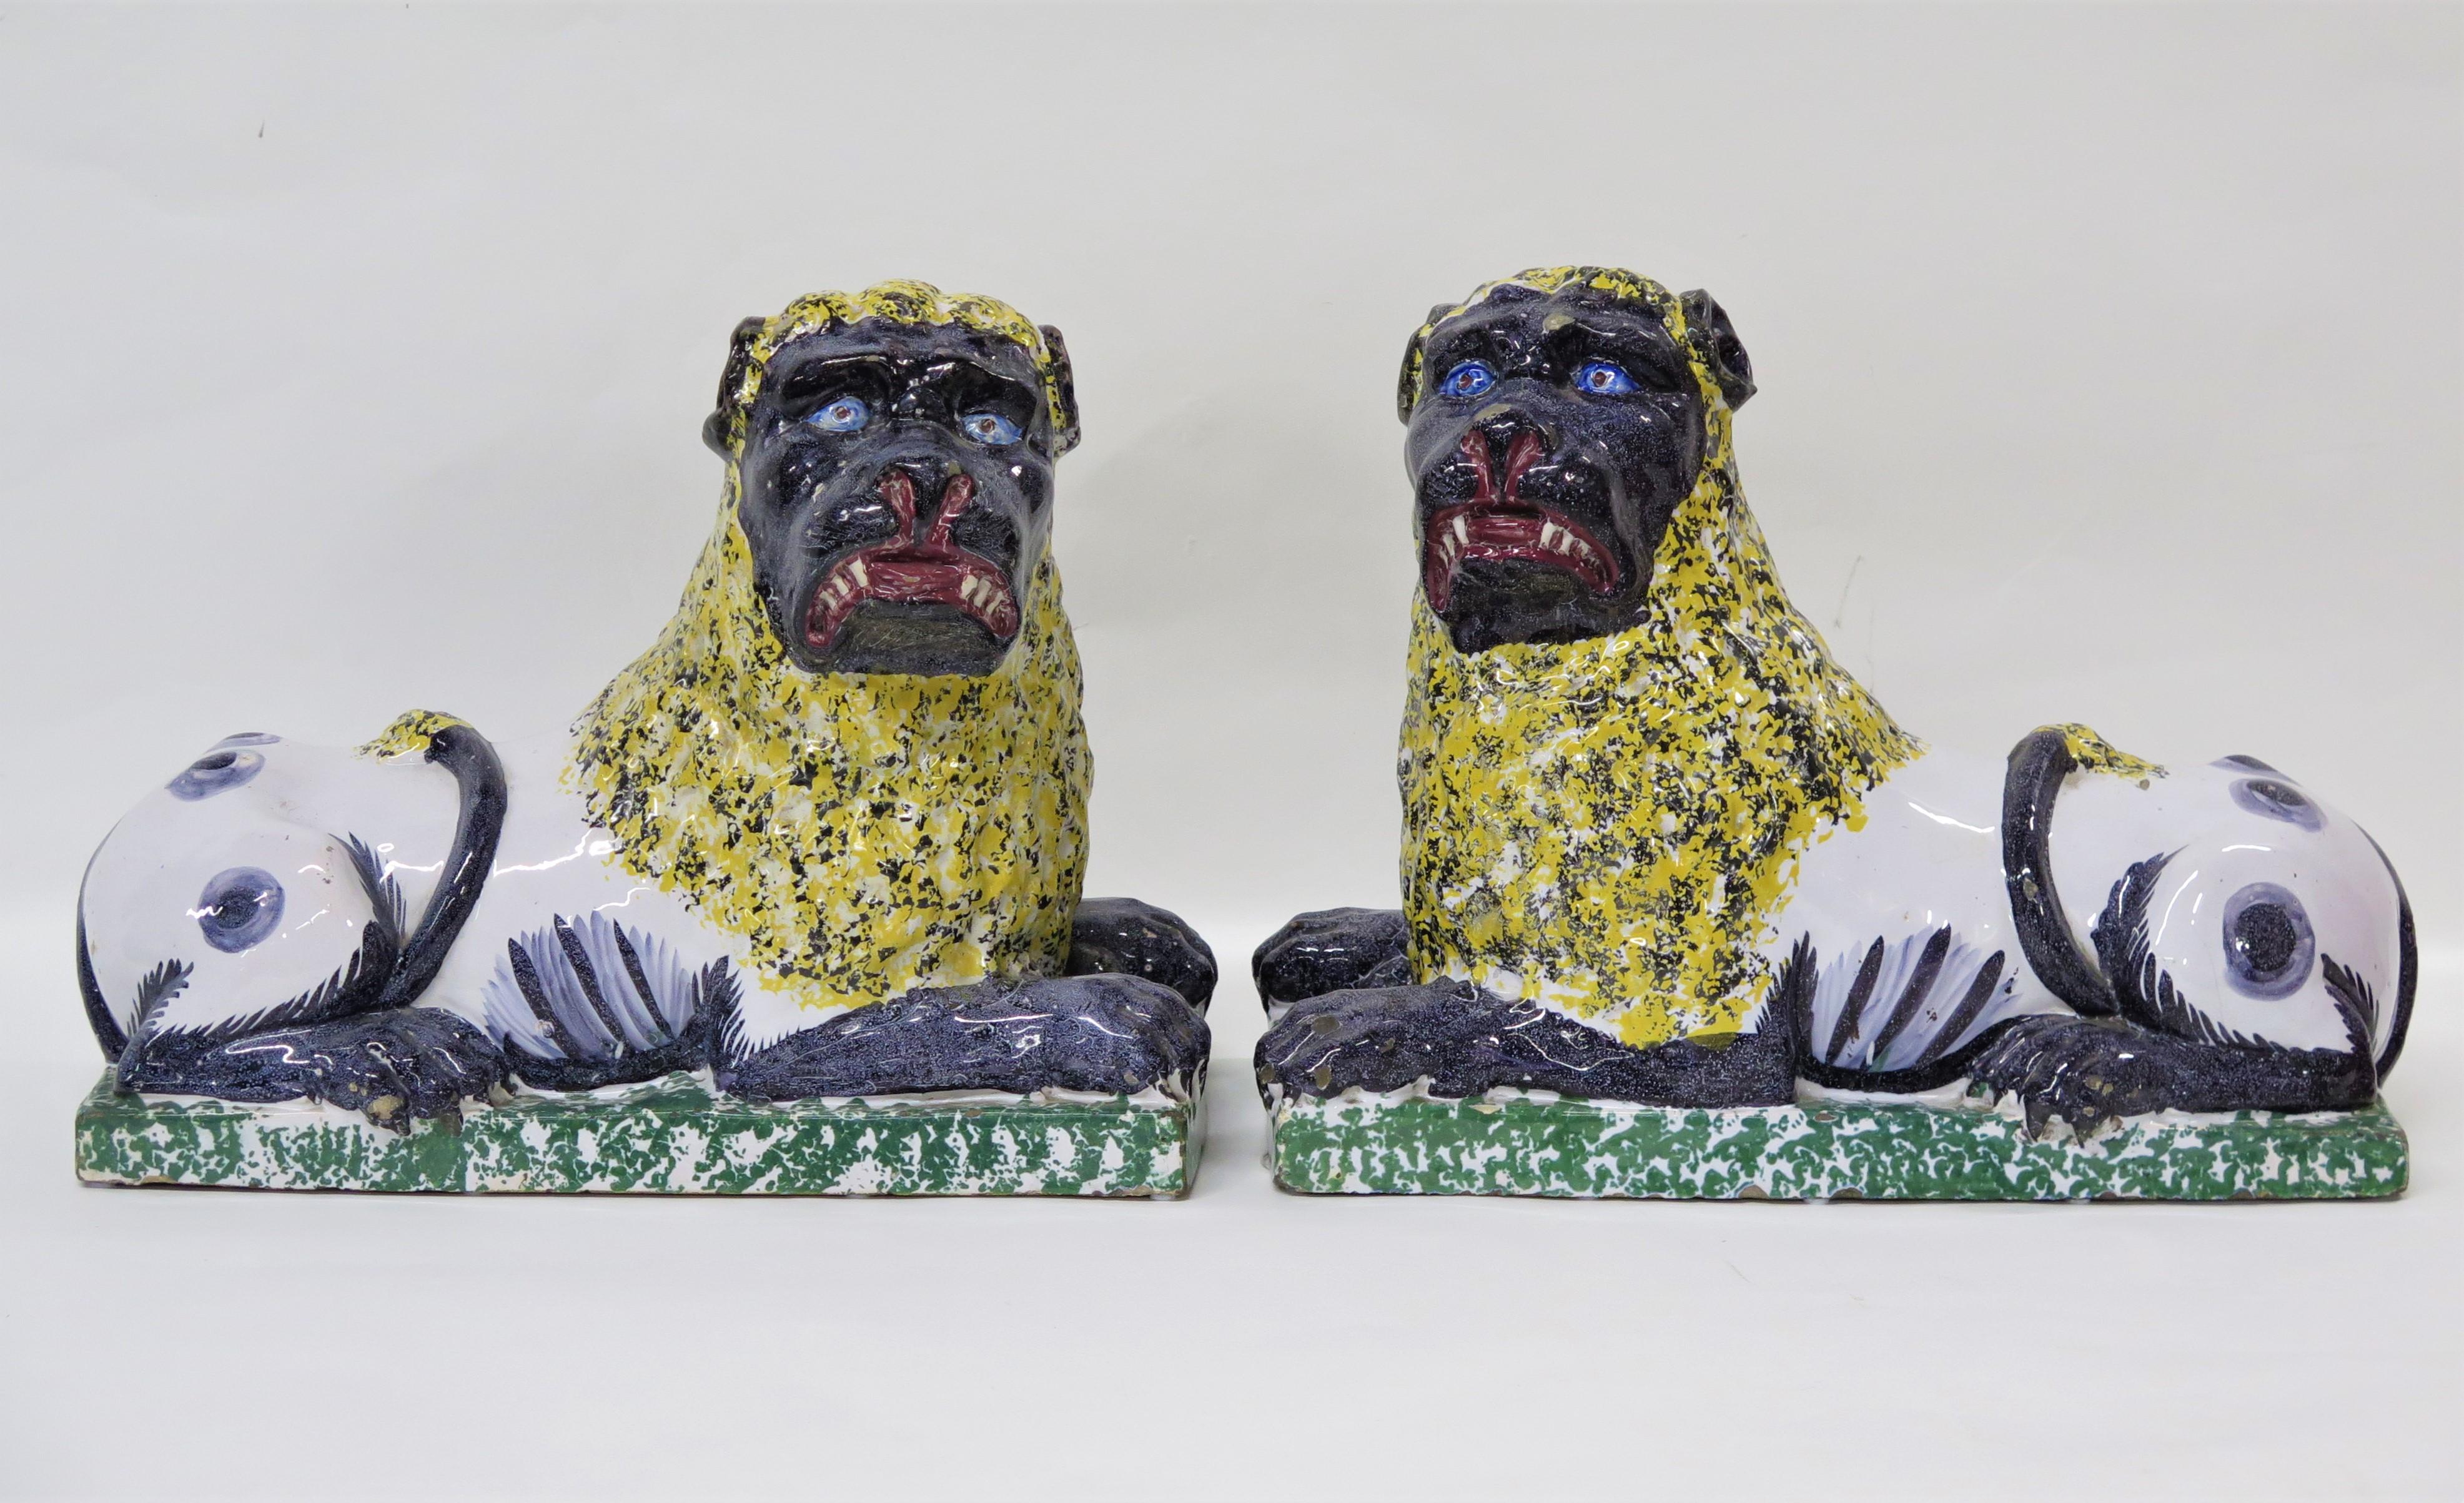 a large handsome pair of Lunéville faience lions, each shown resting on a green sponged plinth base with his tail curled over his back, their legs, paws, tails, and faces are painted gray-blue and their white bodies have gray-blue spots / markings,